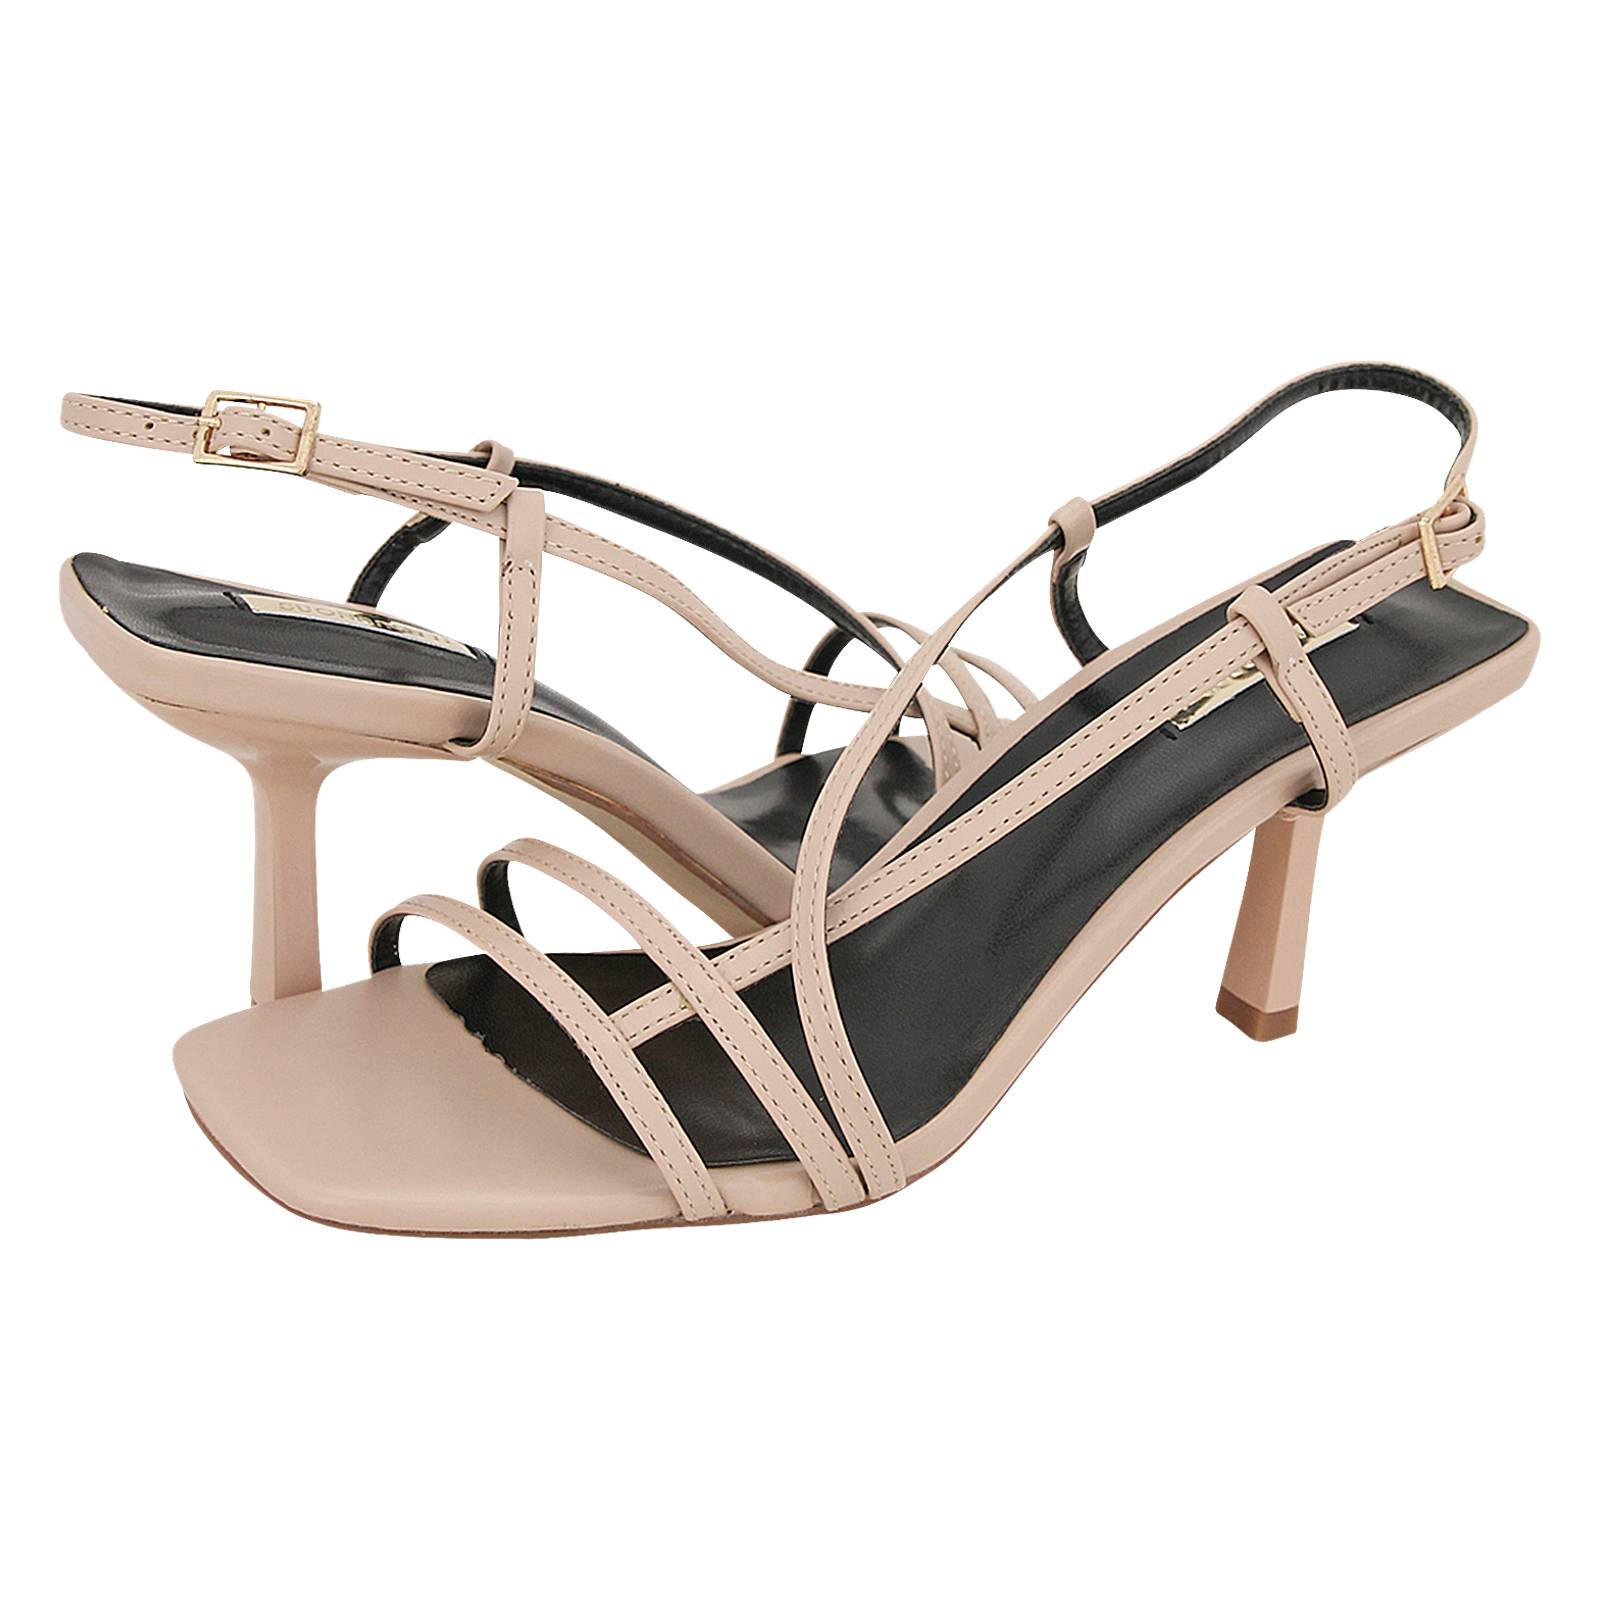 Setri - Buonarotti Women's sandals made of synthetic leather - Gianna ...